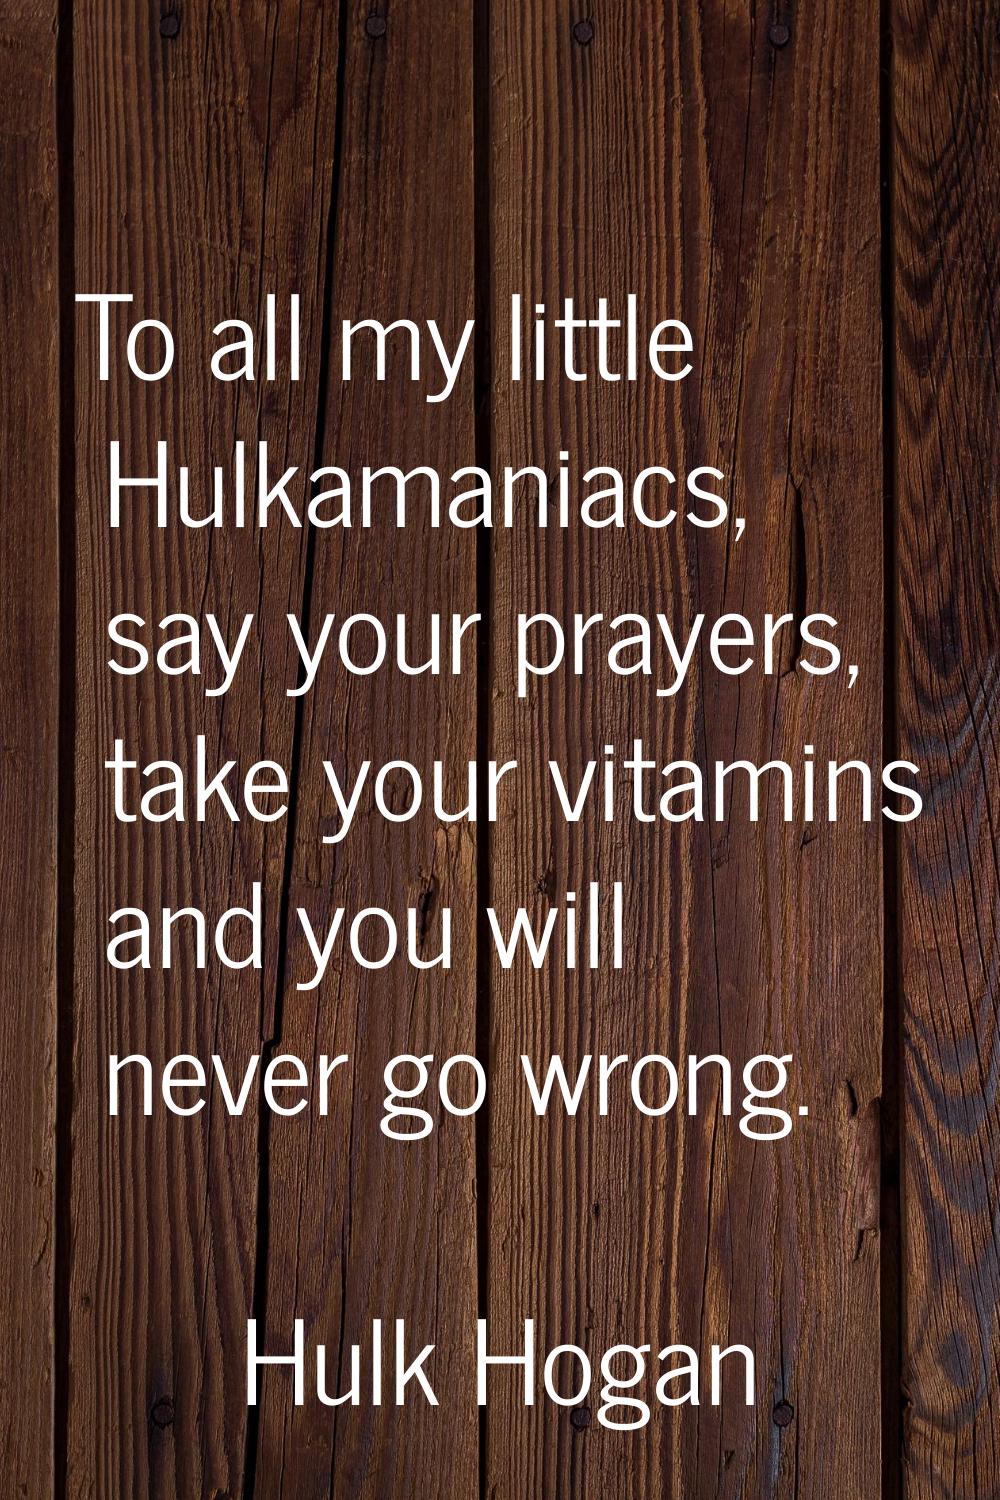 To all my little Hulkamaniacs, say your prayers, take your vitamins and you will never go wrong.